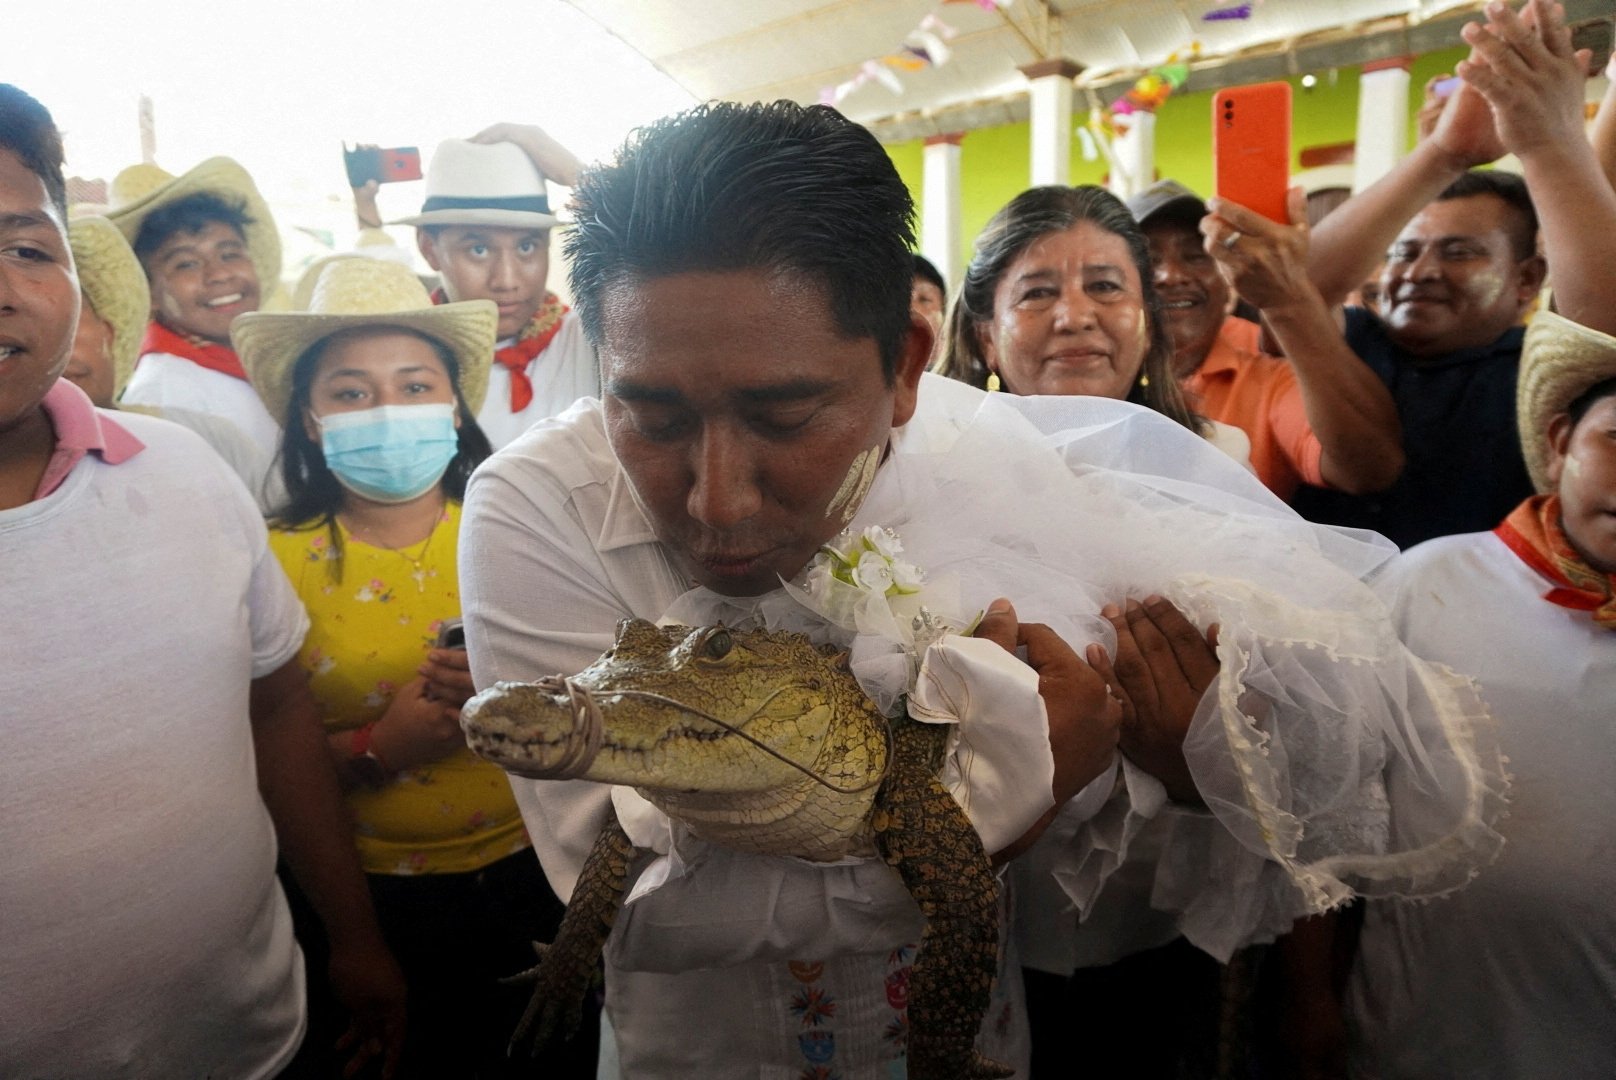 The San Pedro Huamelula Mayor Victor Hugo Sosa kisses an alligator dressed as a bride during a traditional ritual marriage between the mayor and the reptile that depicts a princess, as a prayer to plead for nature's bounty, San Pedro Huamelula, Oaxaca state, Mexico, June 30, 2022. (Reuters Photo)